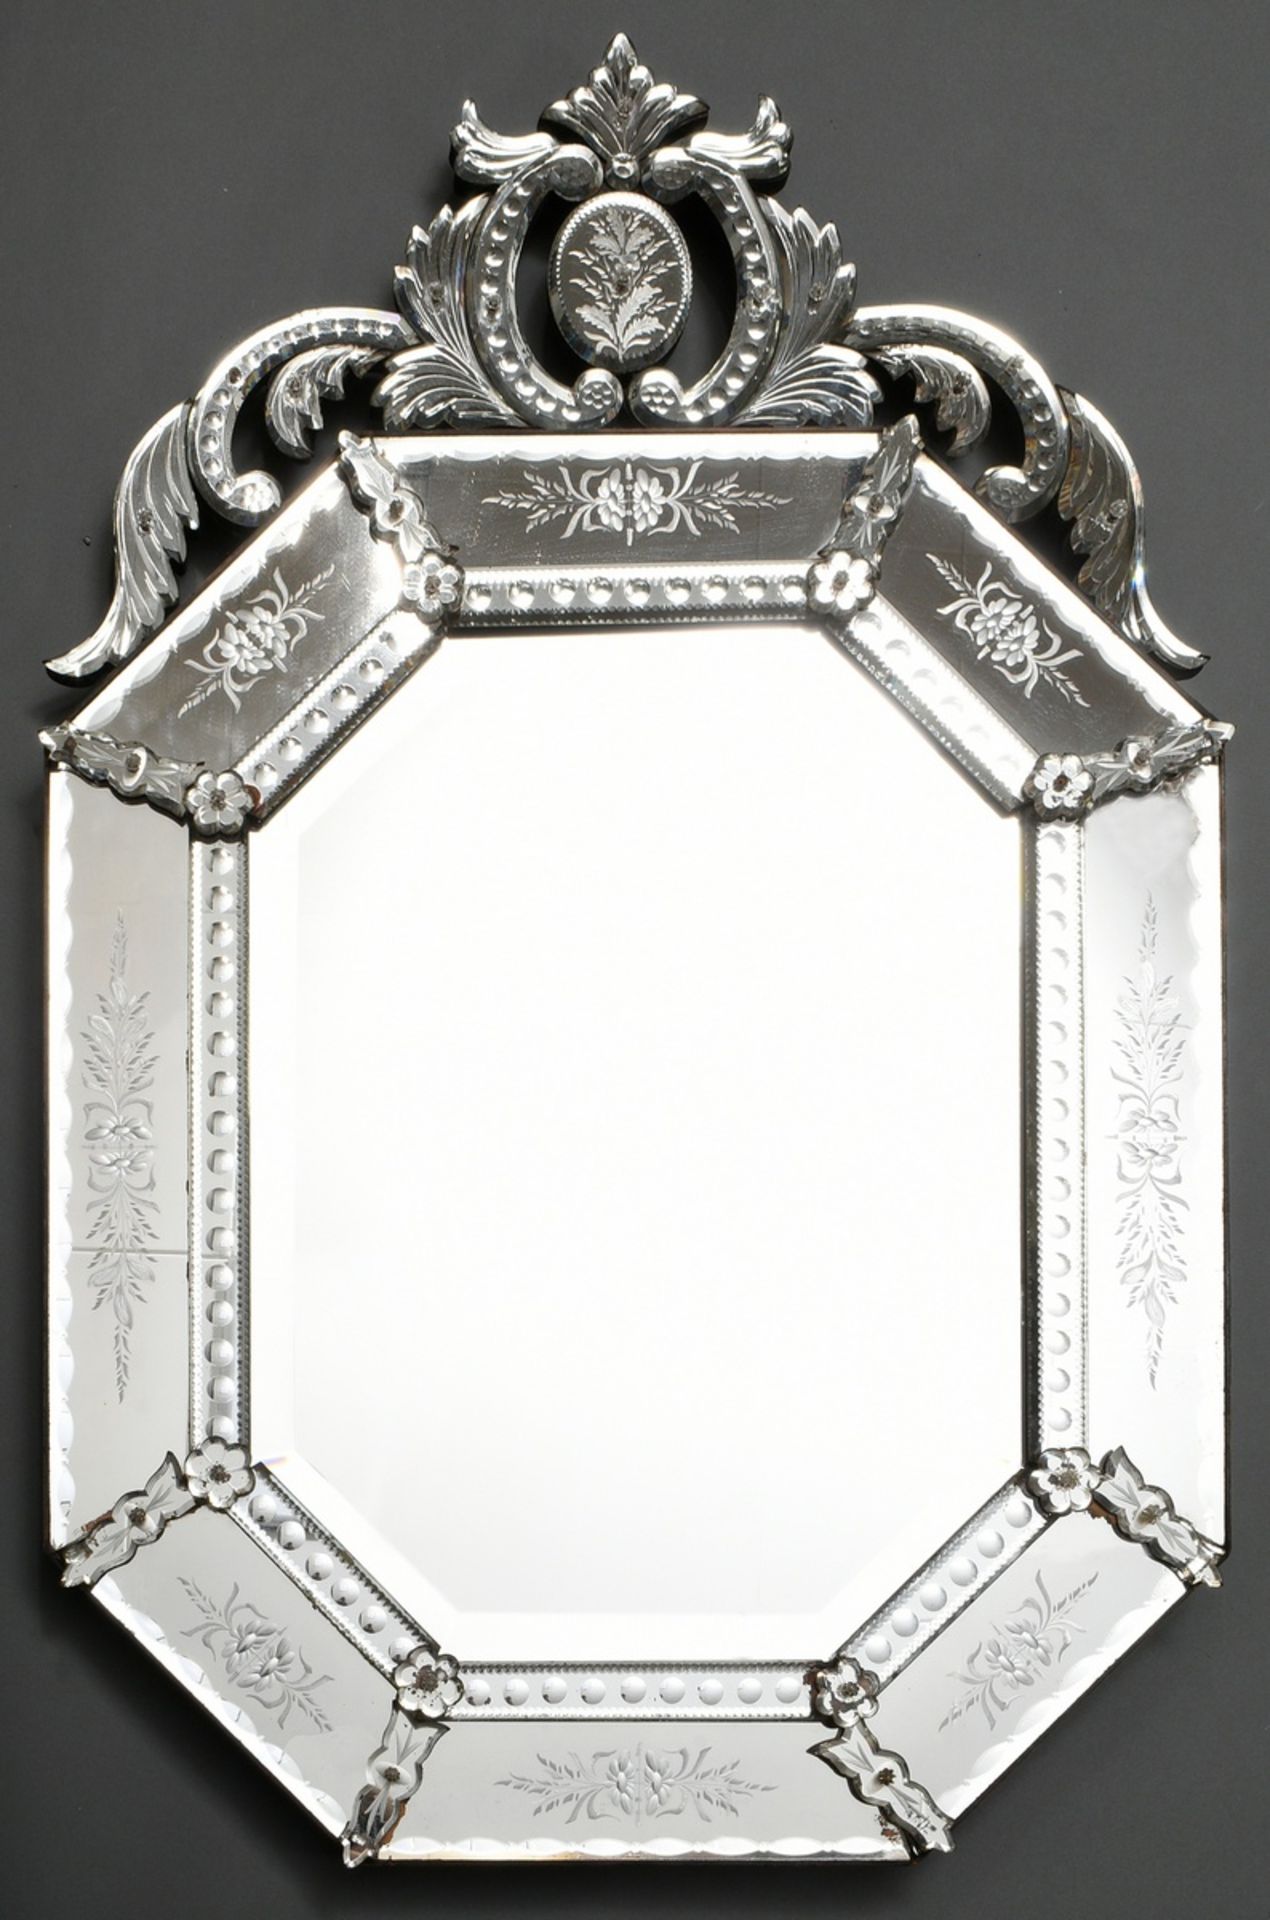 Venetian mirror with vegetal top and cut ornaments, inner mirror glass faceted, outer mirror glass 